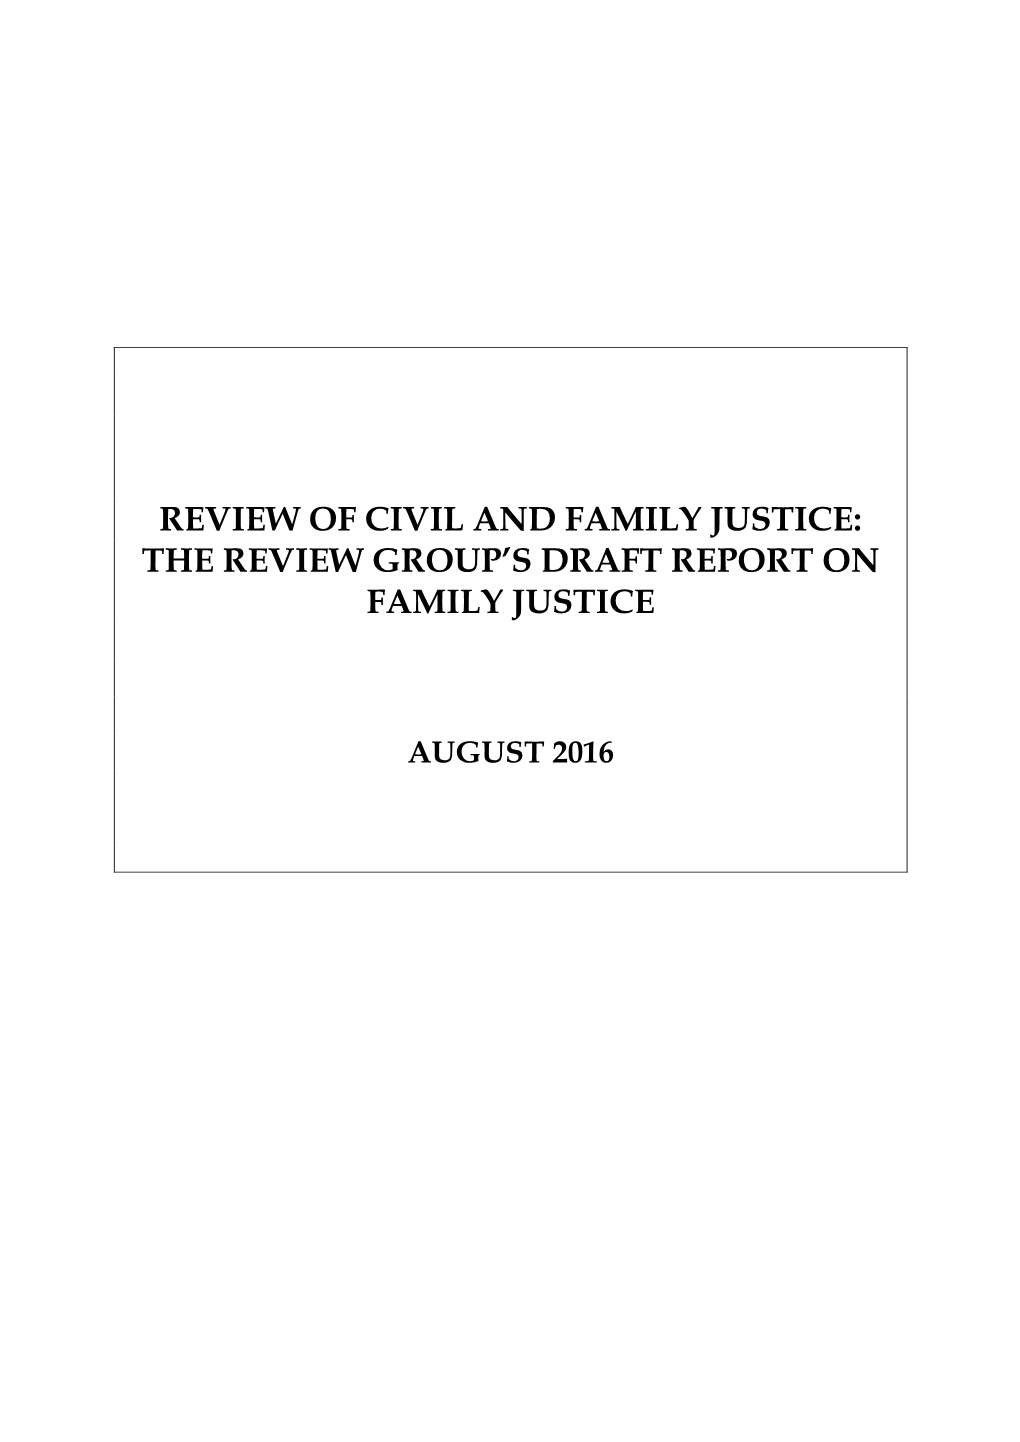 Review of Civil and Family Justice: the Review Group’S Draft Report on Family Justice